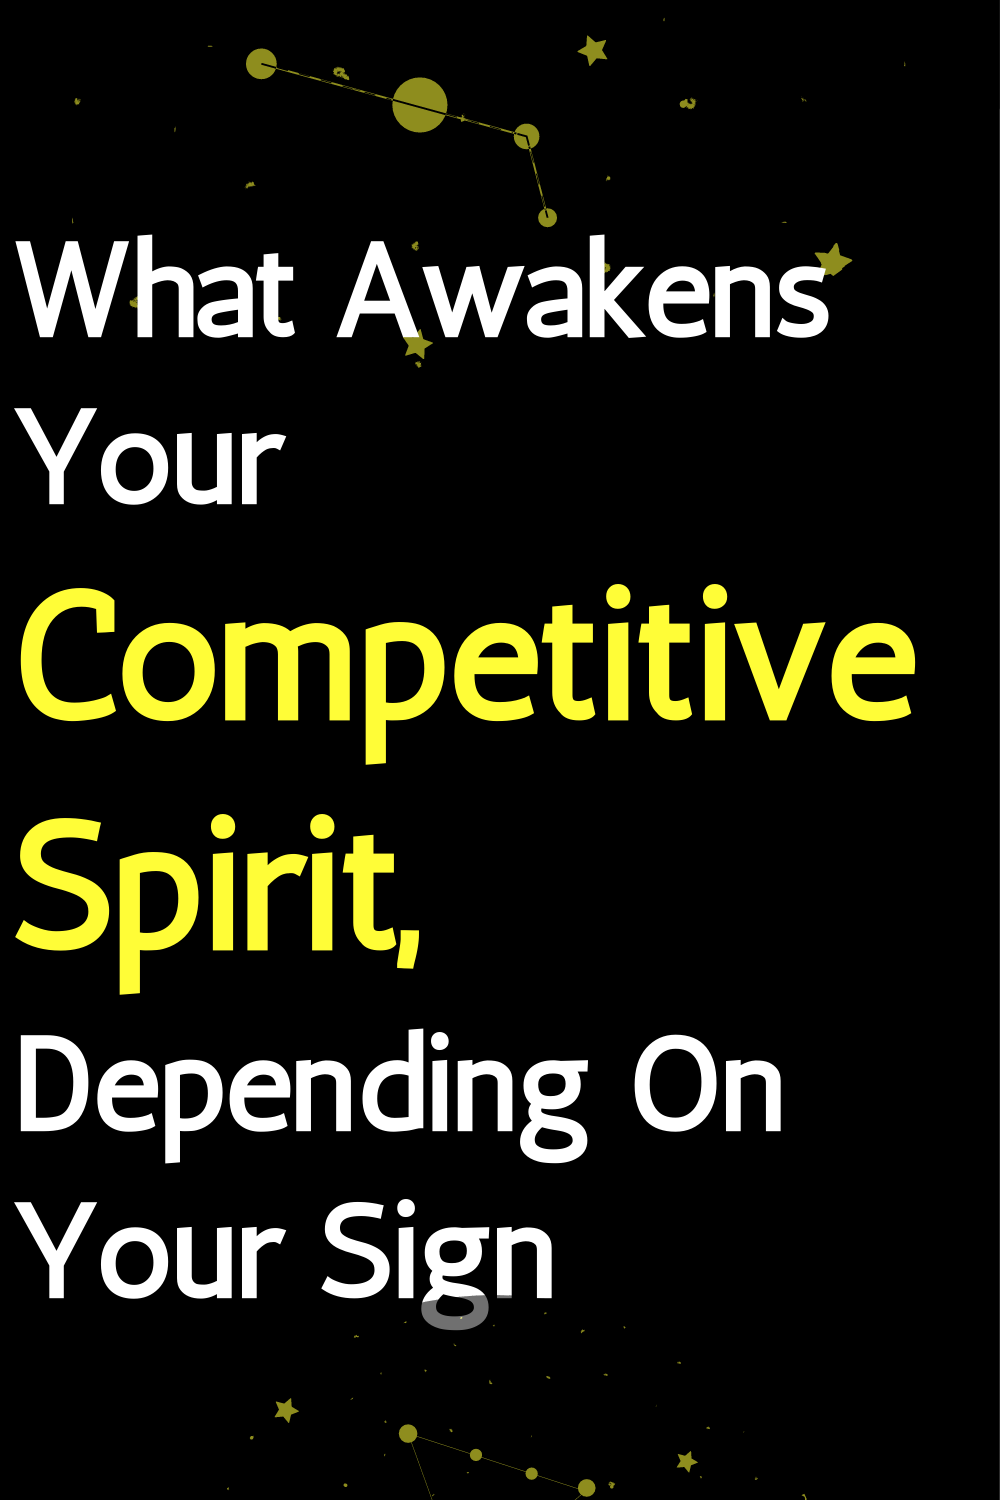 What Awakens Your Competitive Spirit, Depending On Your Sign